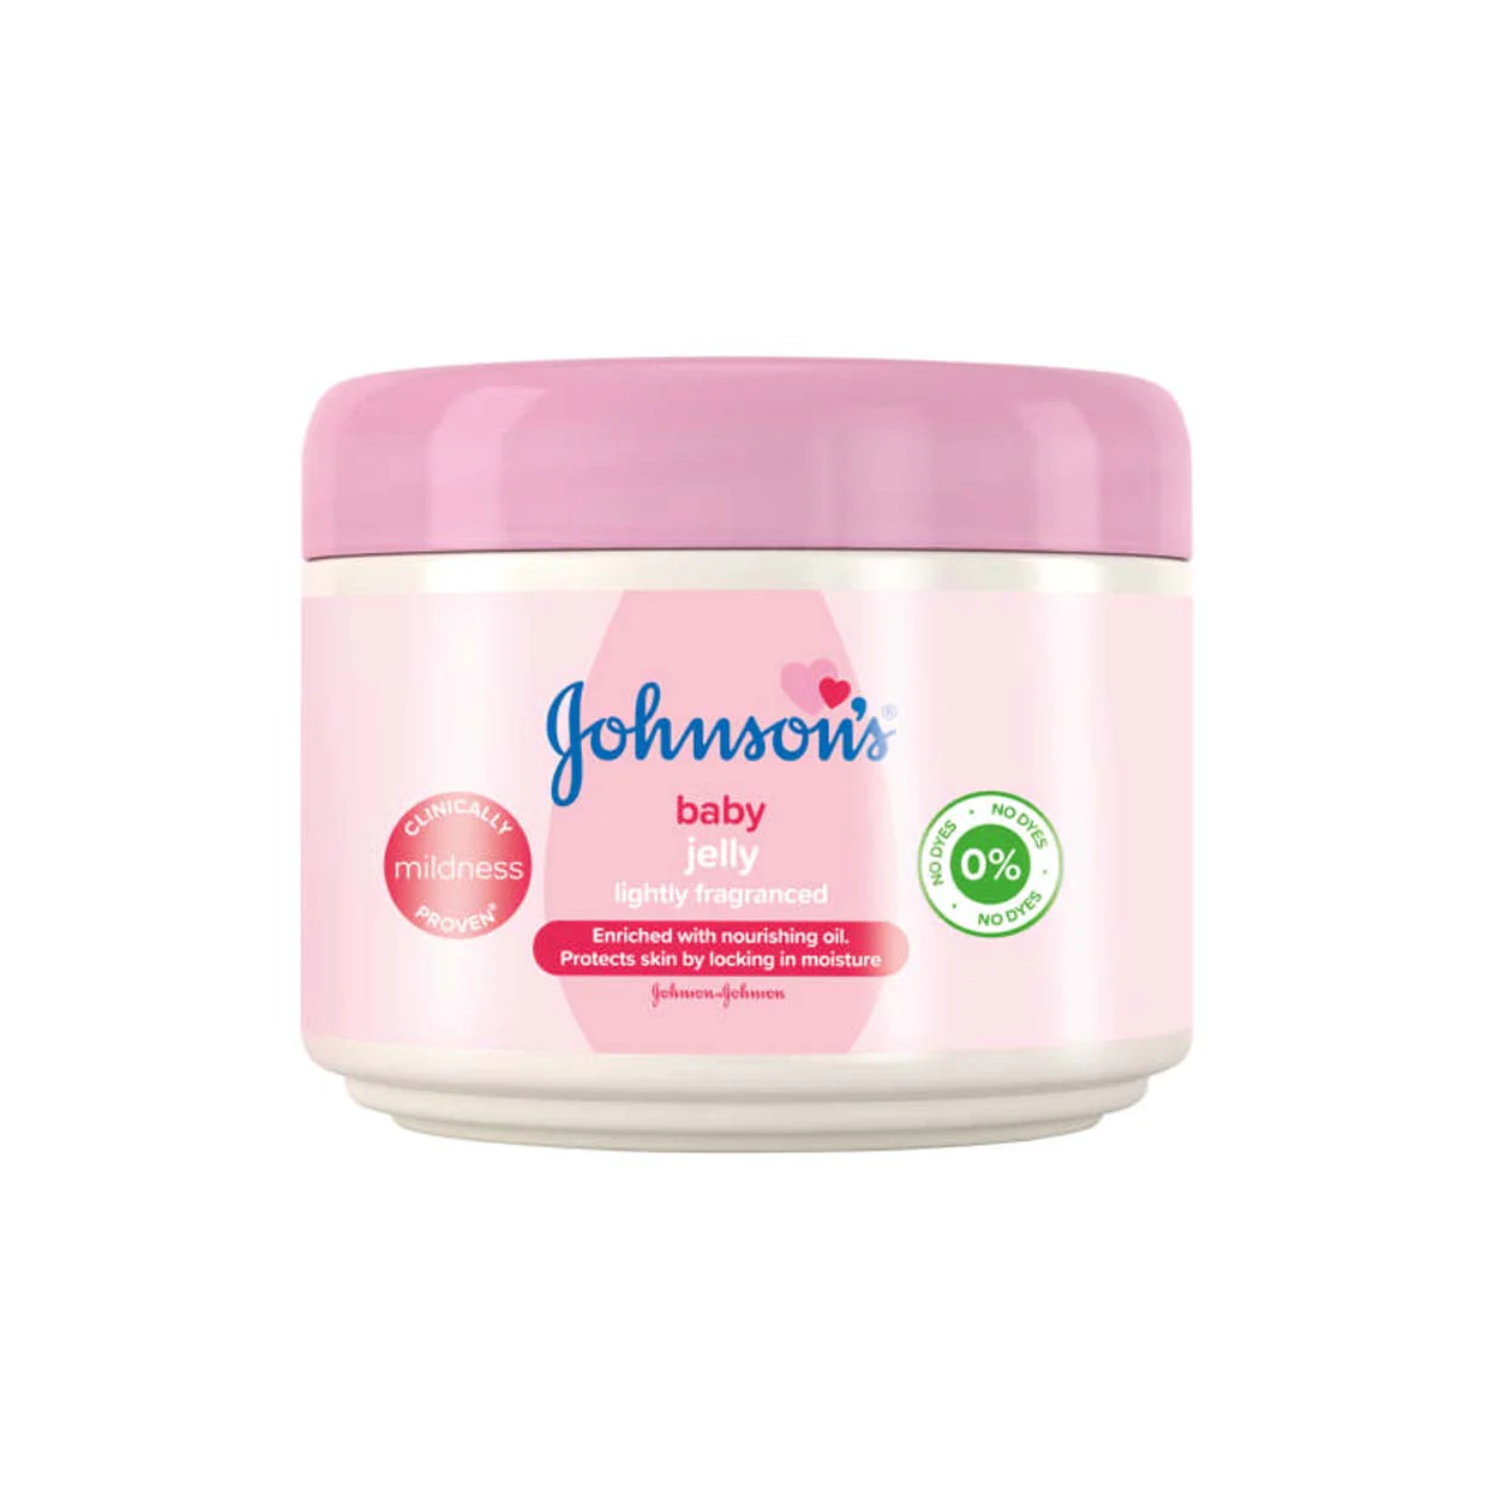 johnsons-baby-jelly-lightly-fragranced-south-africa-250ml